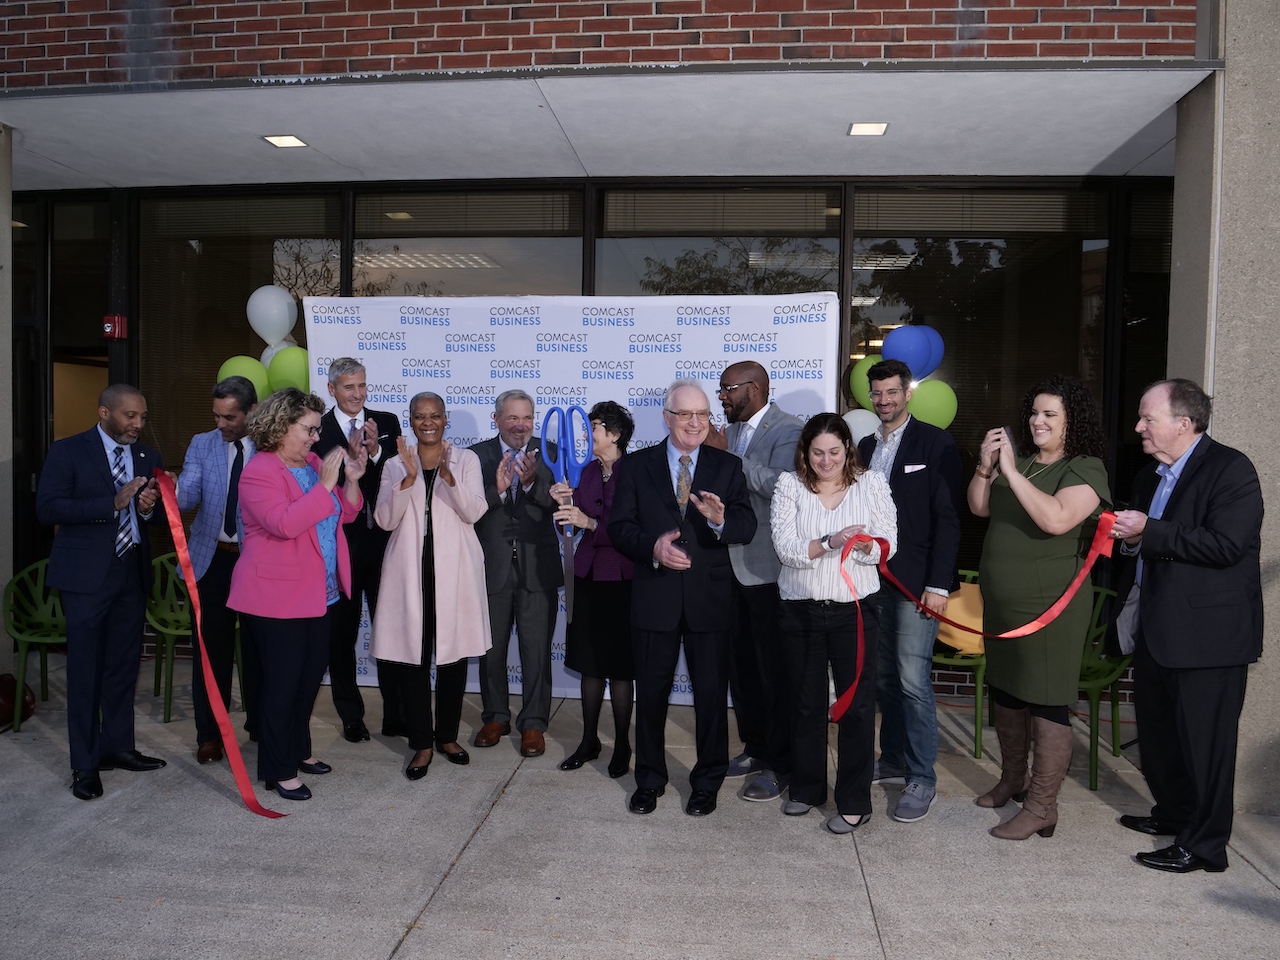 Chamber of Commerce of Eastern Connecticut and Comcast Business Celebrate Grand Opening of Regional Innovation Center